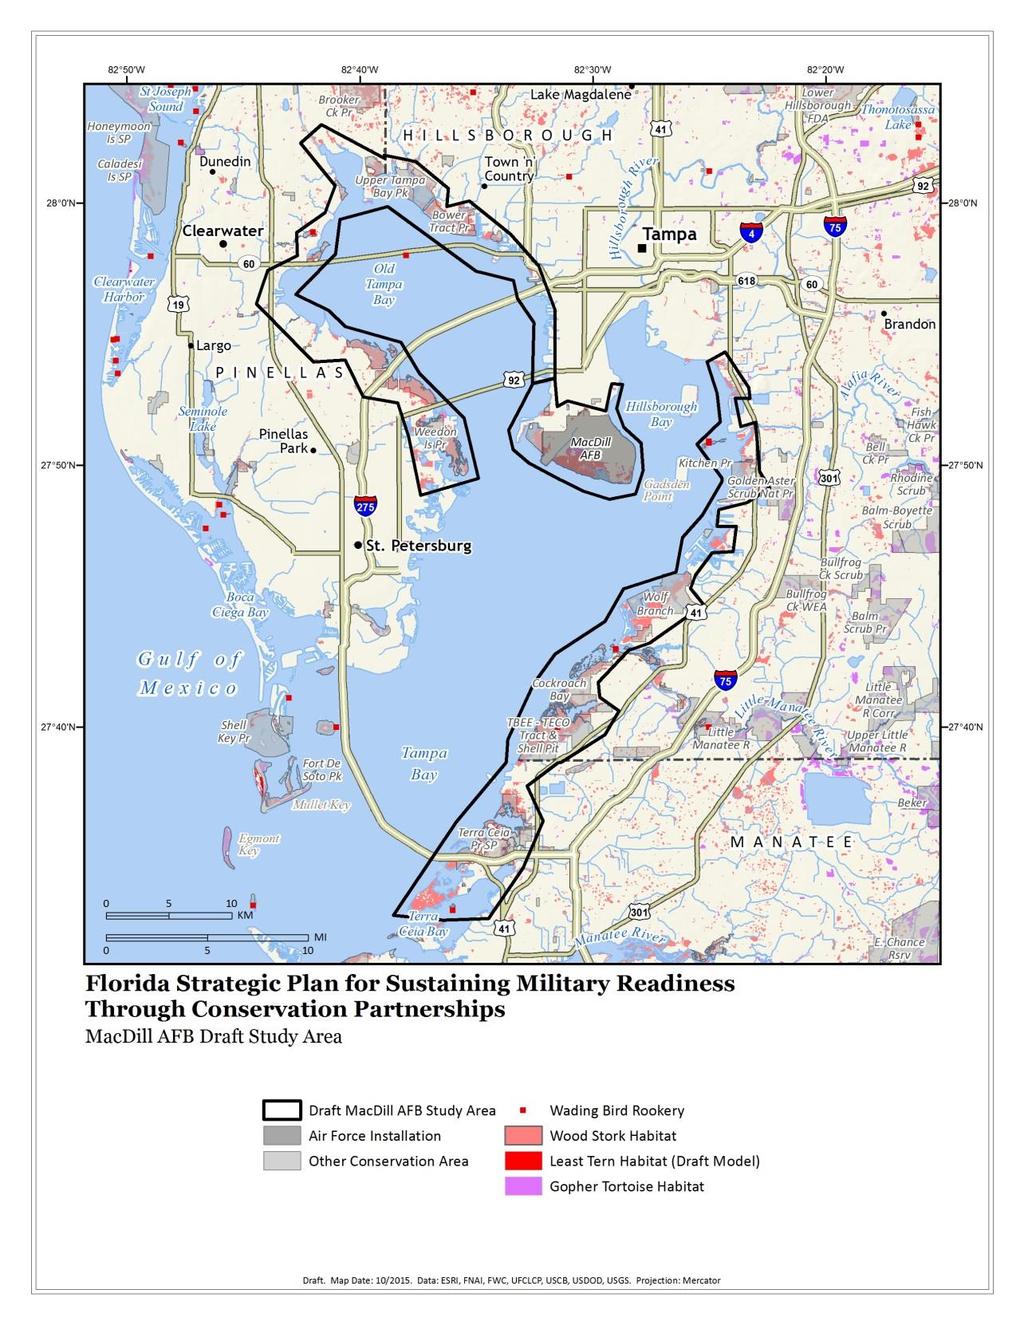 Draft Study Areas: MacDill AFB Based primarily on wetland and seagrass related conservation/ mitigation opportunities